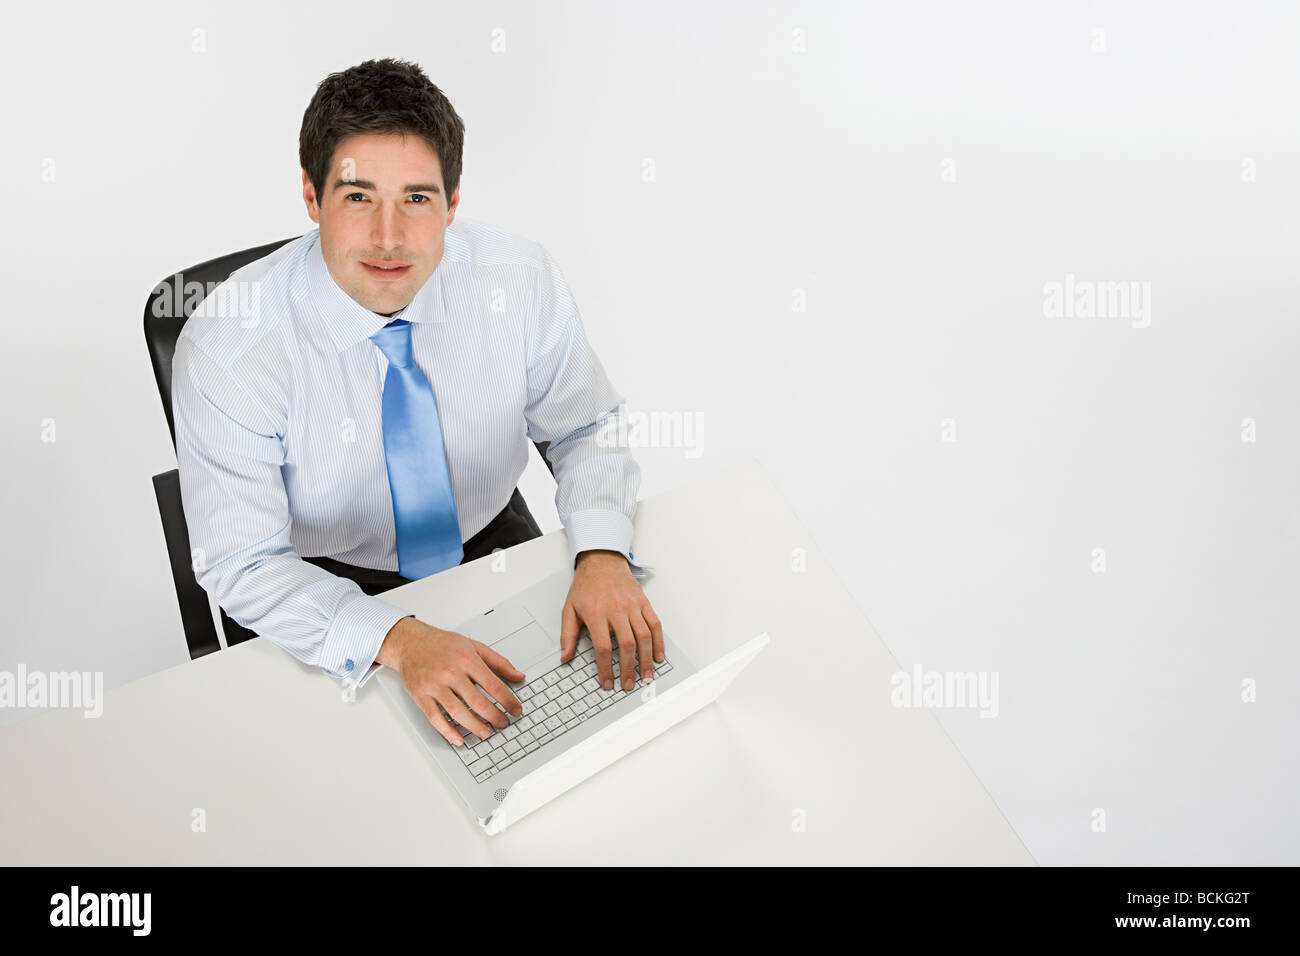 Office worker with laptop Stock Photo